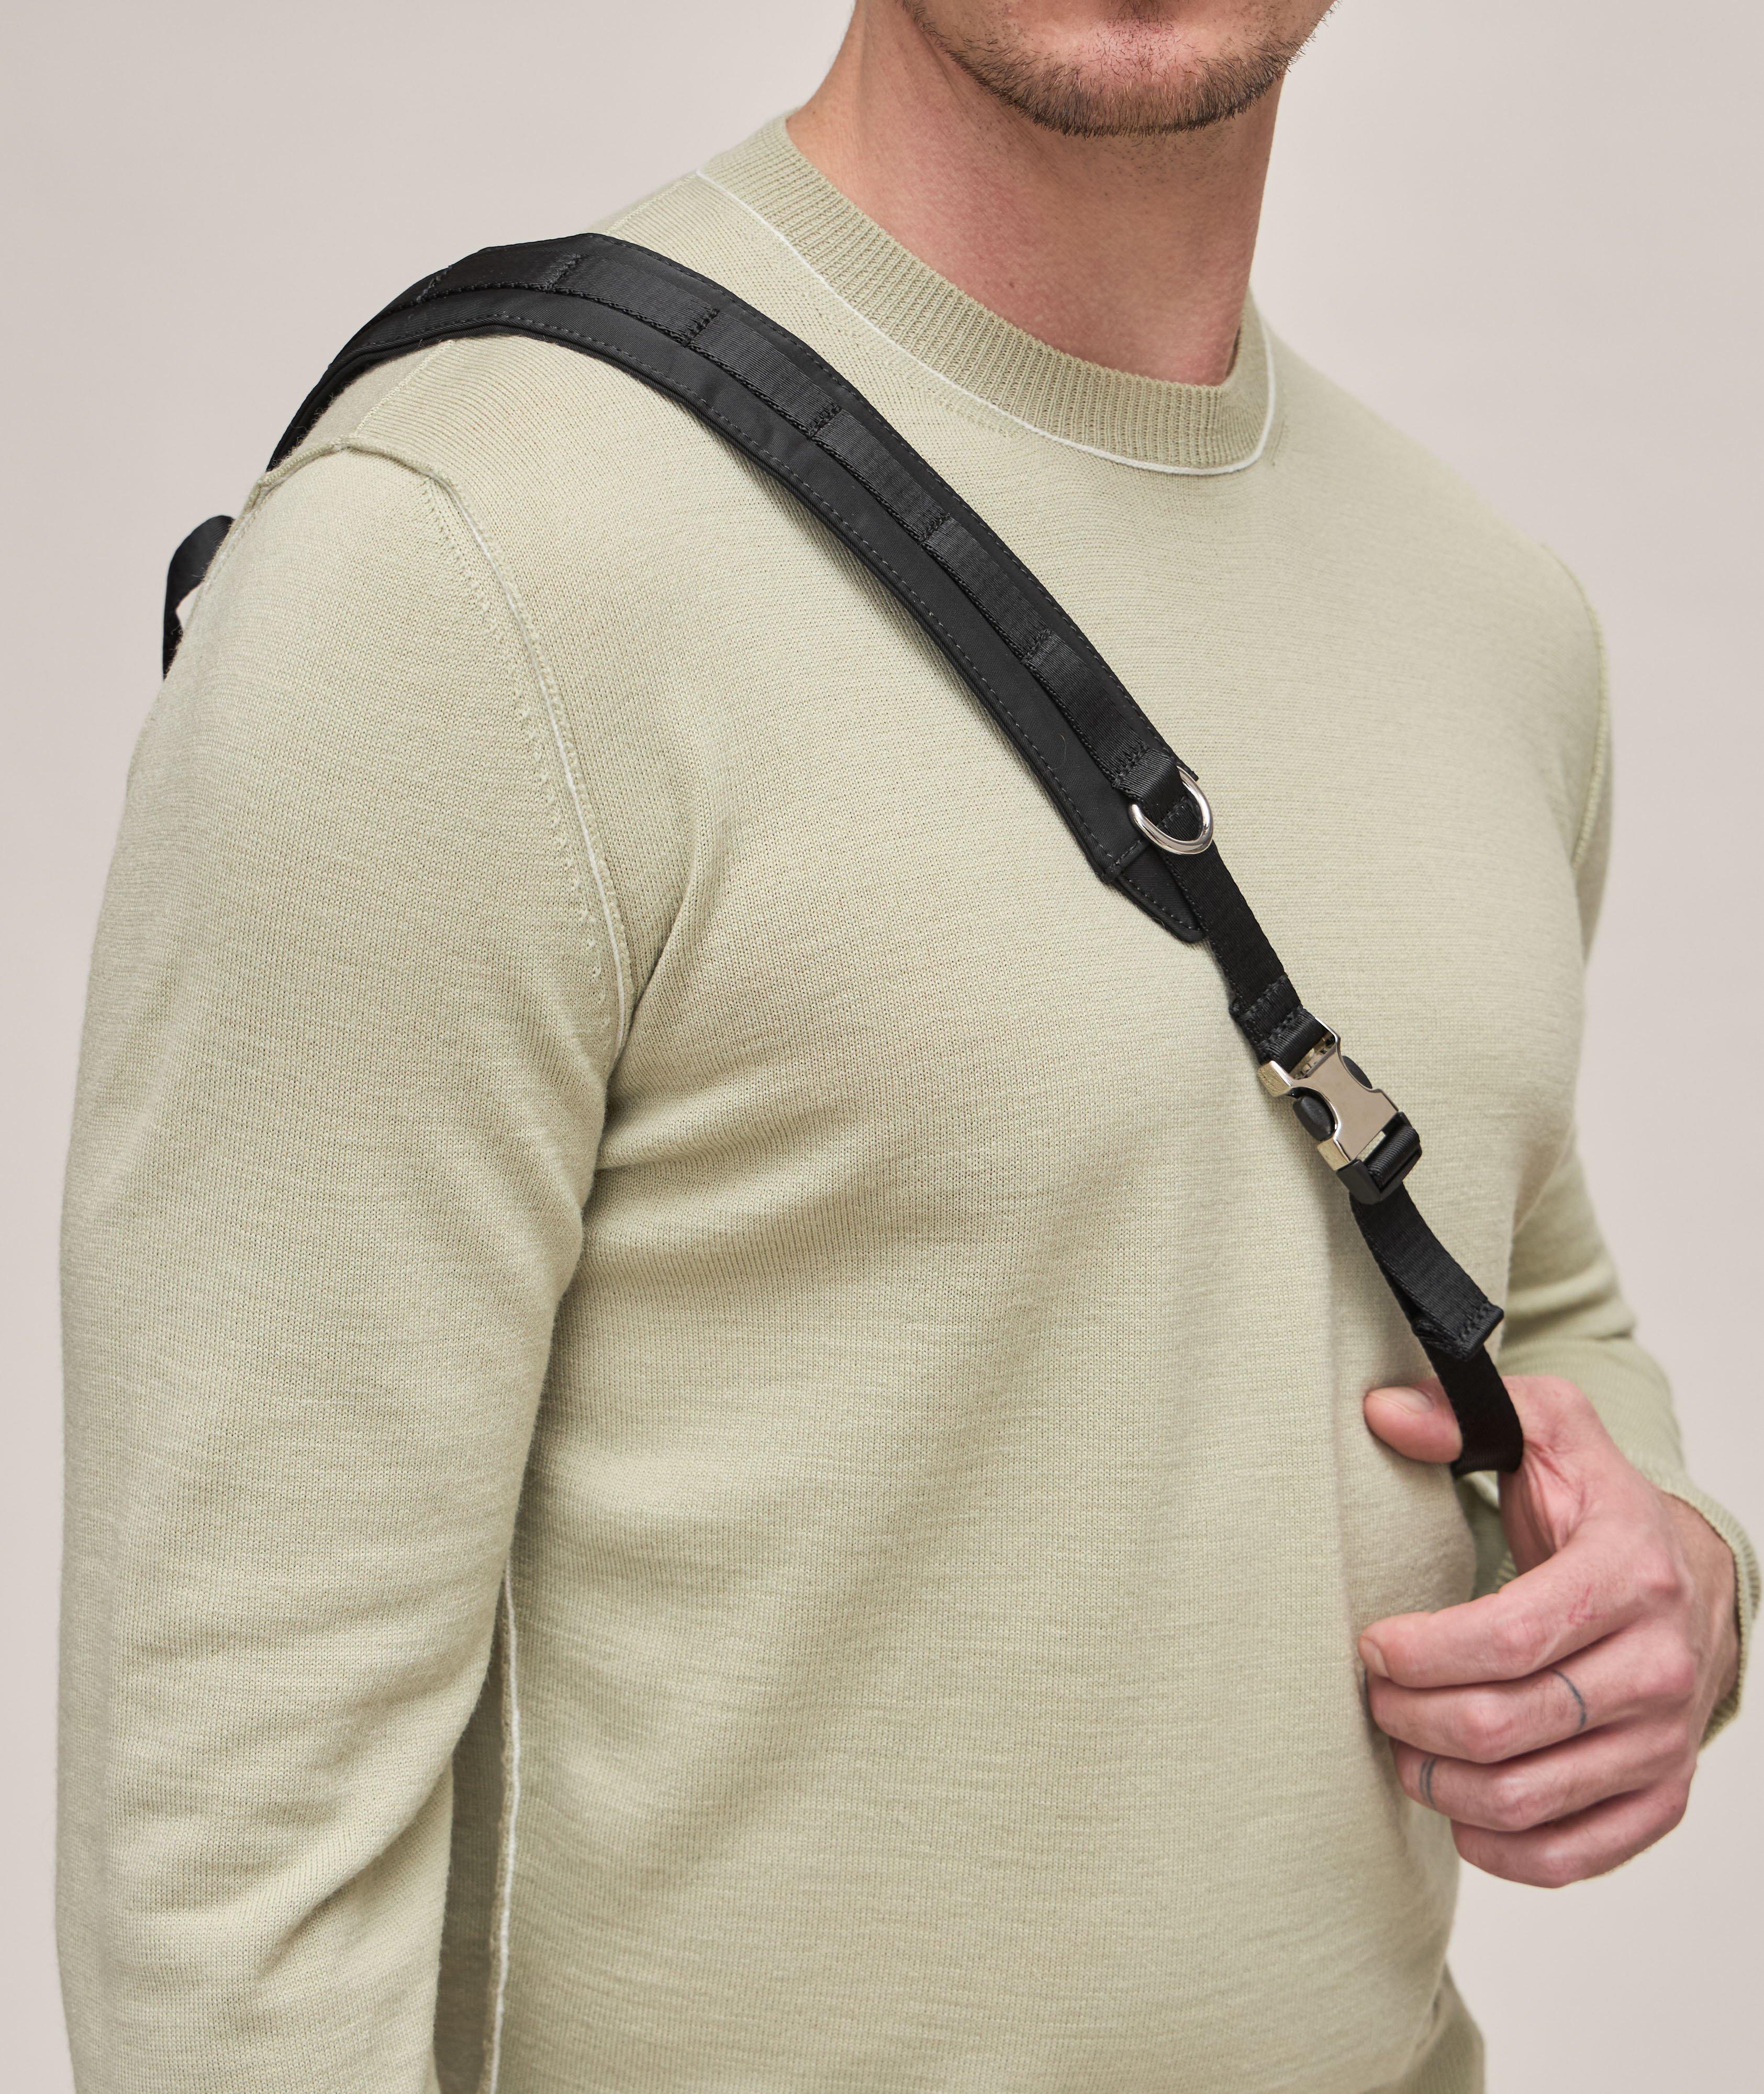 Triangle Technical Fabric Sling Bag 